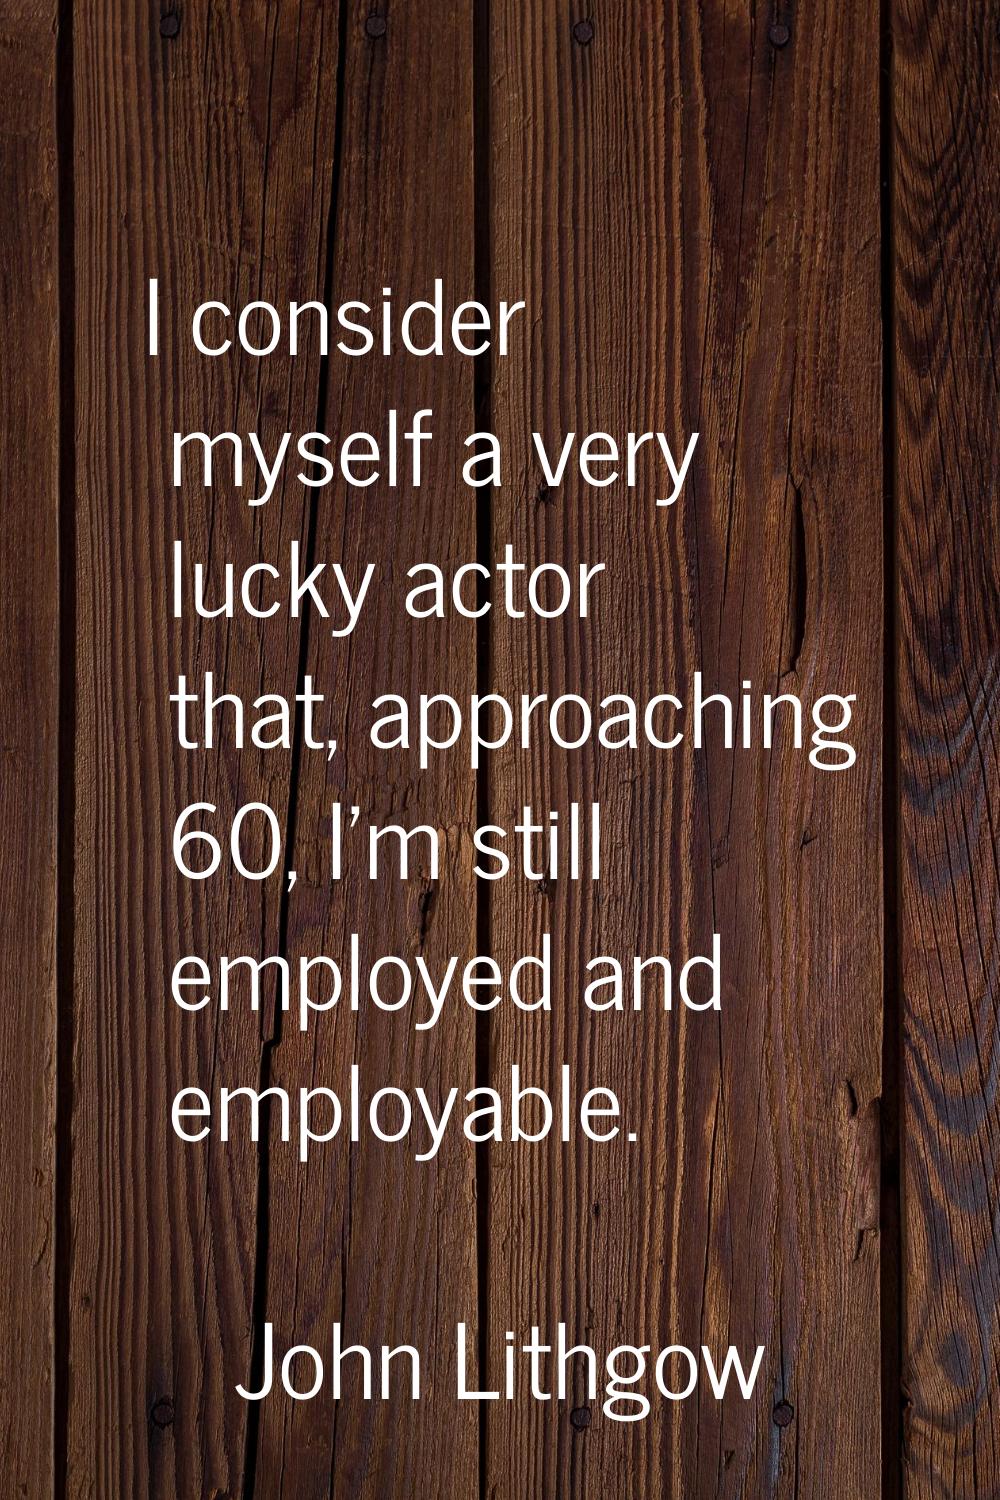 I consider myself a very lucky actor that, approaching 60, I'm still employed and employable.